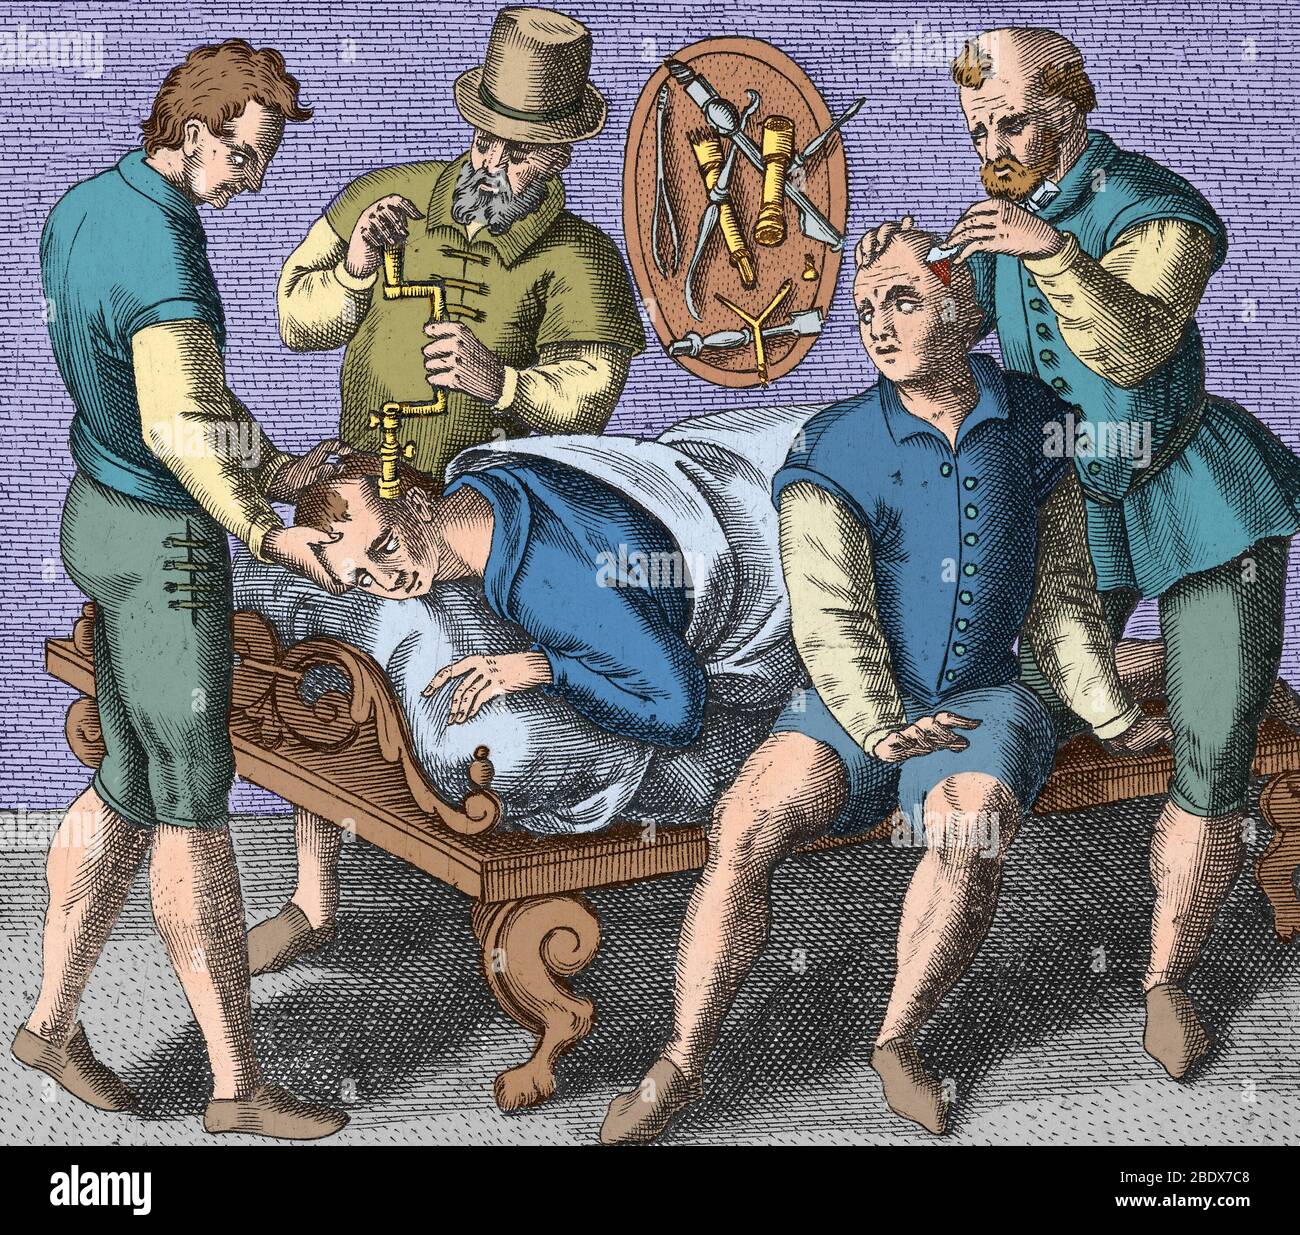 Trepanning Being Performed, 1594 Stock Photo